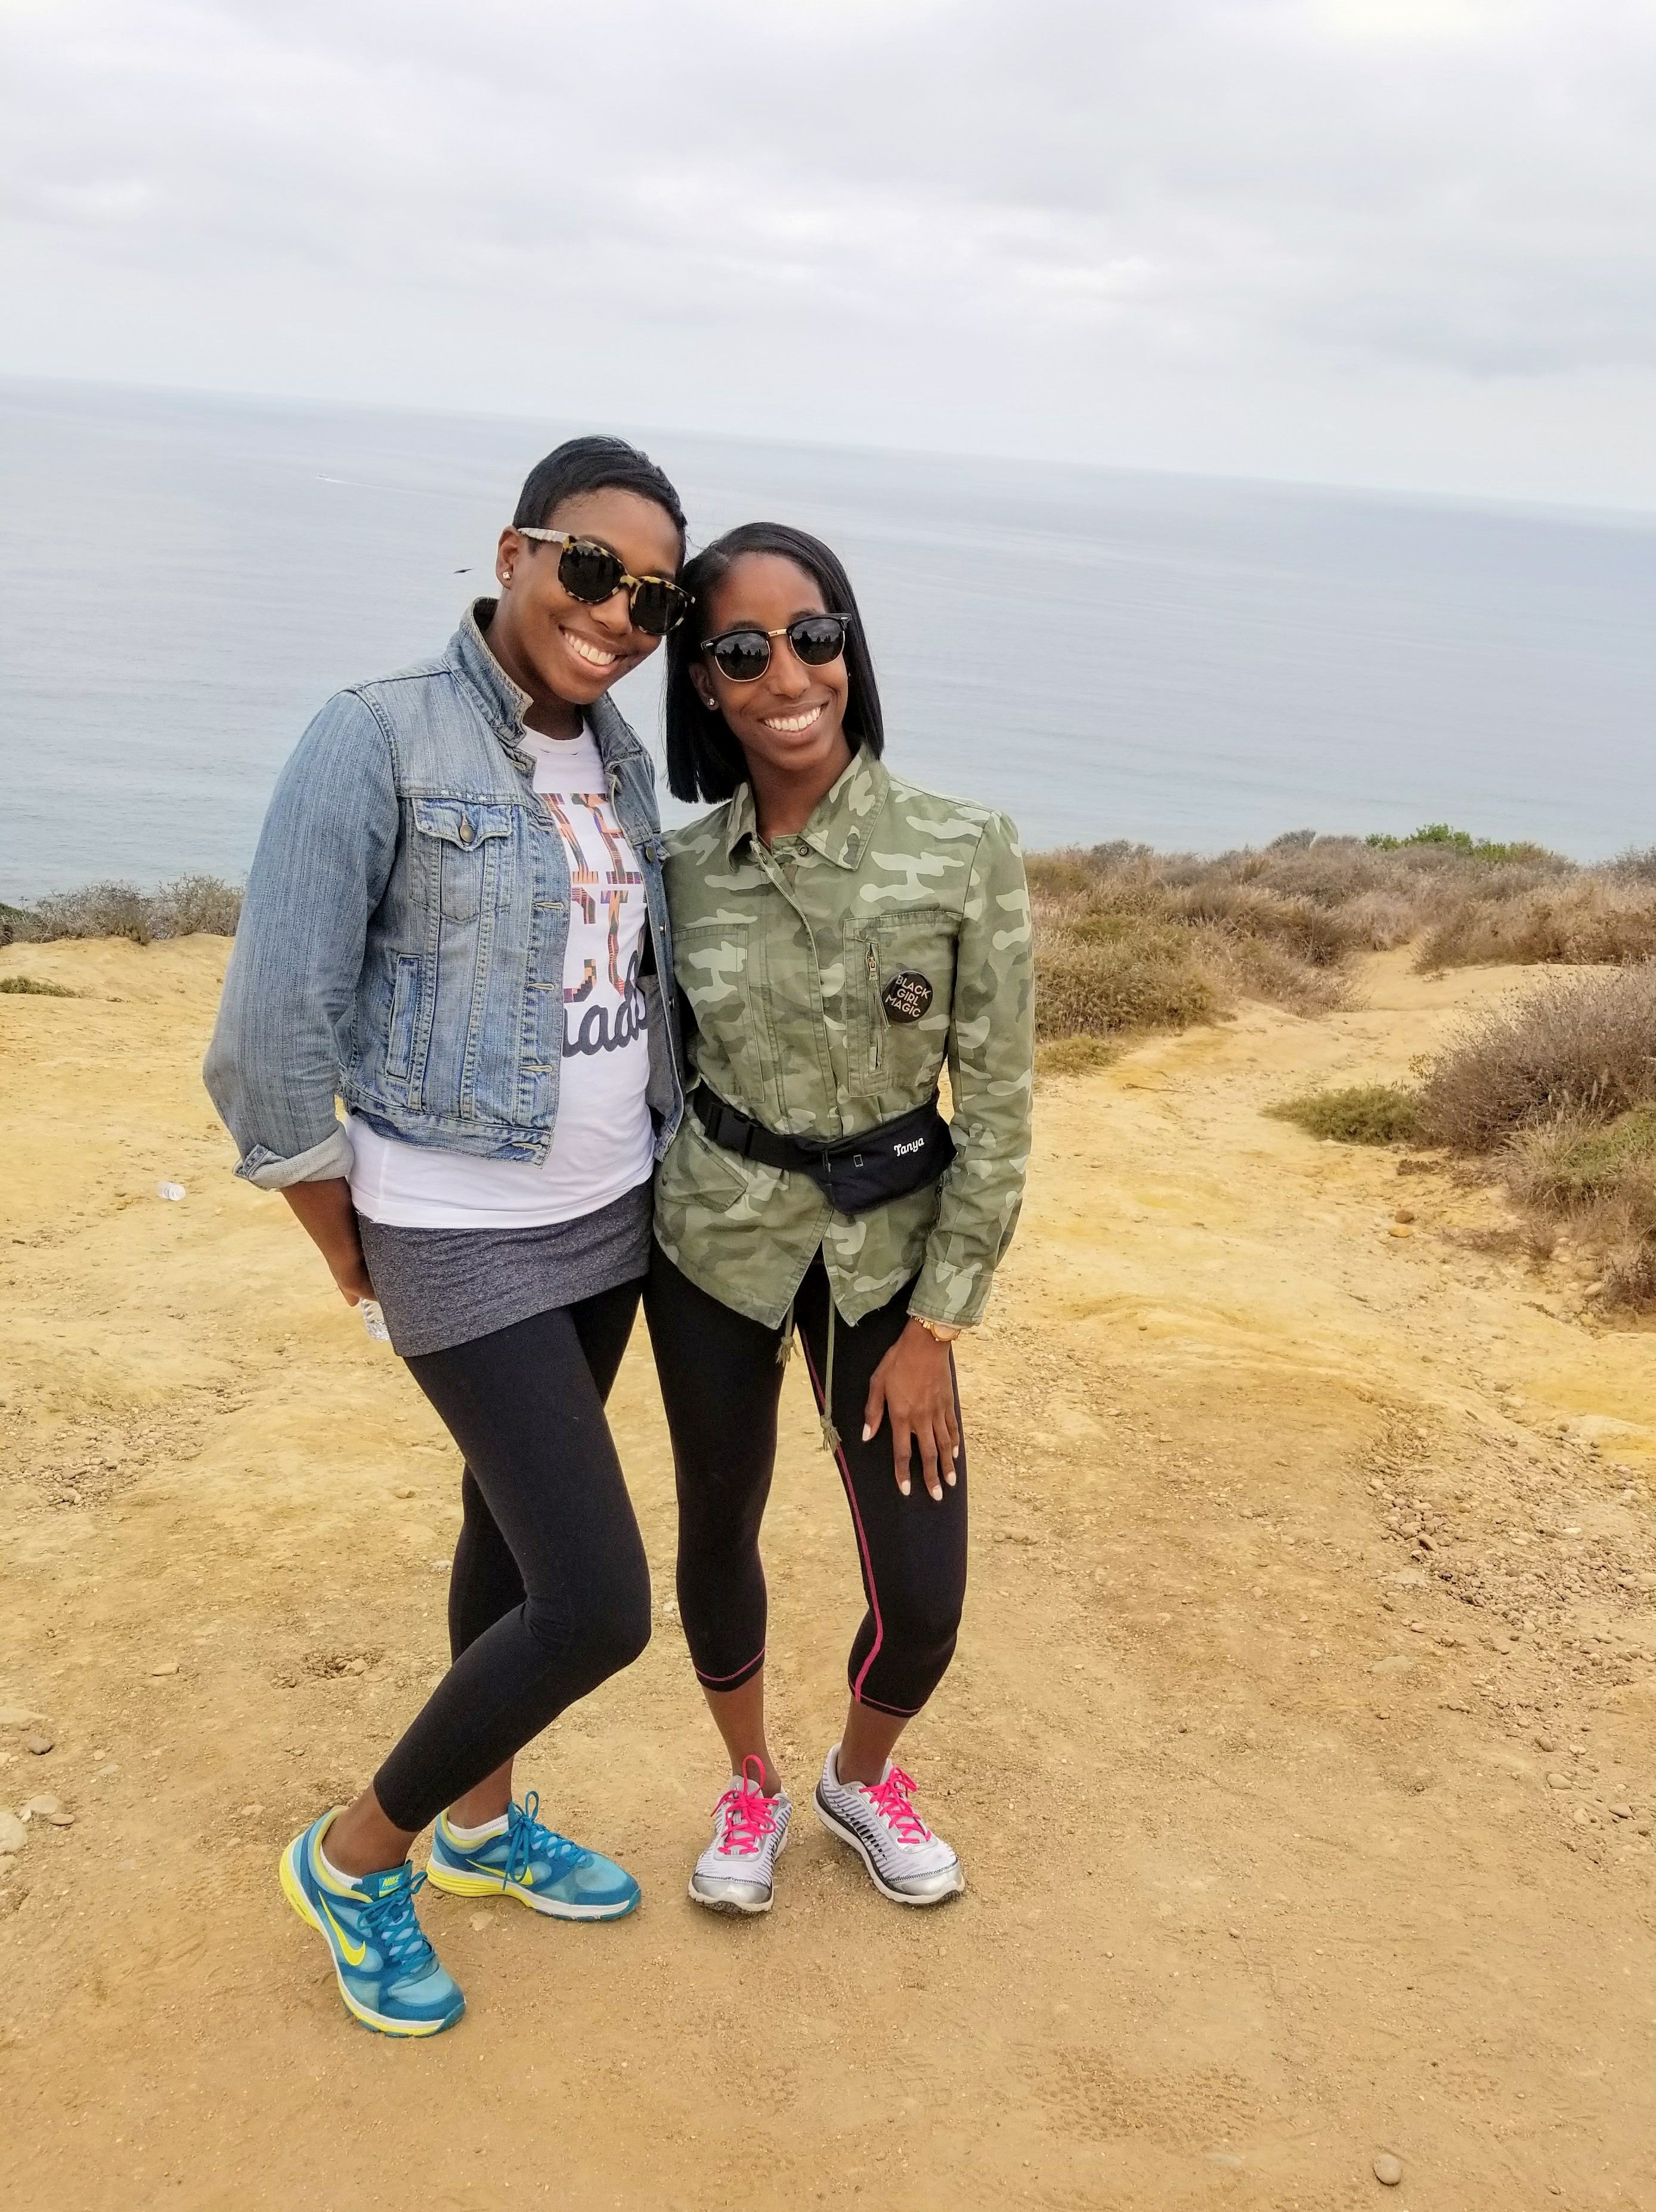 Taking This Scenic San Diego Road Trip With My Sister Was Exactly The Self Care Bonding We Needed
